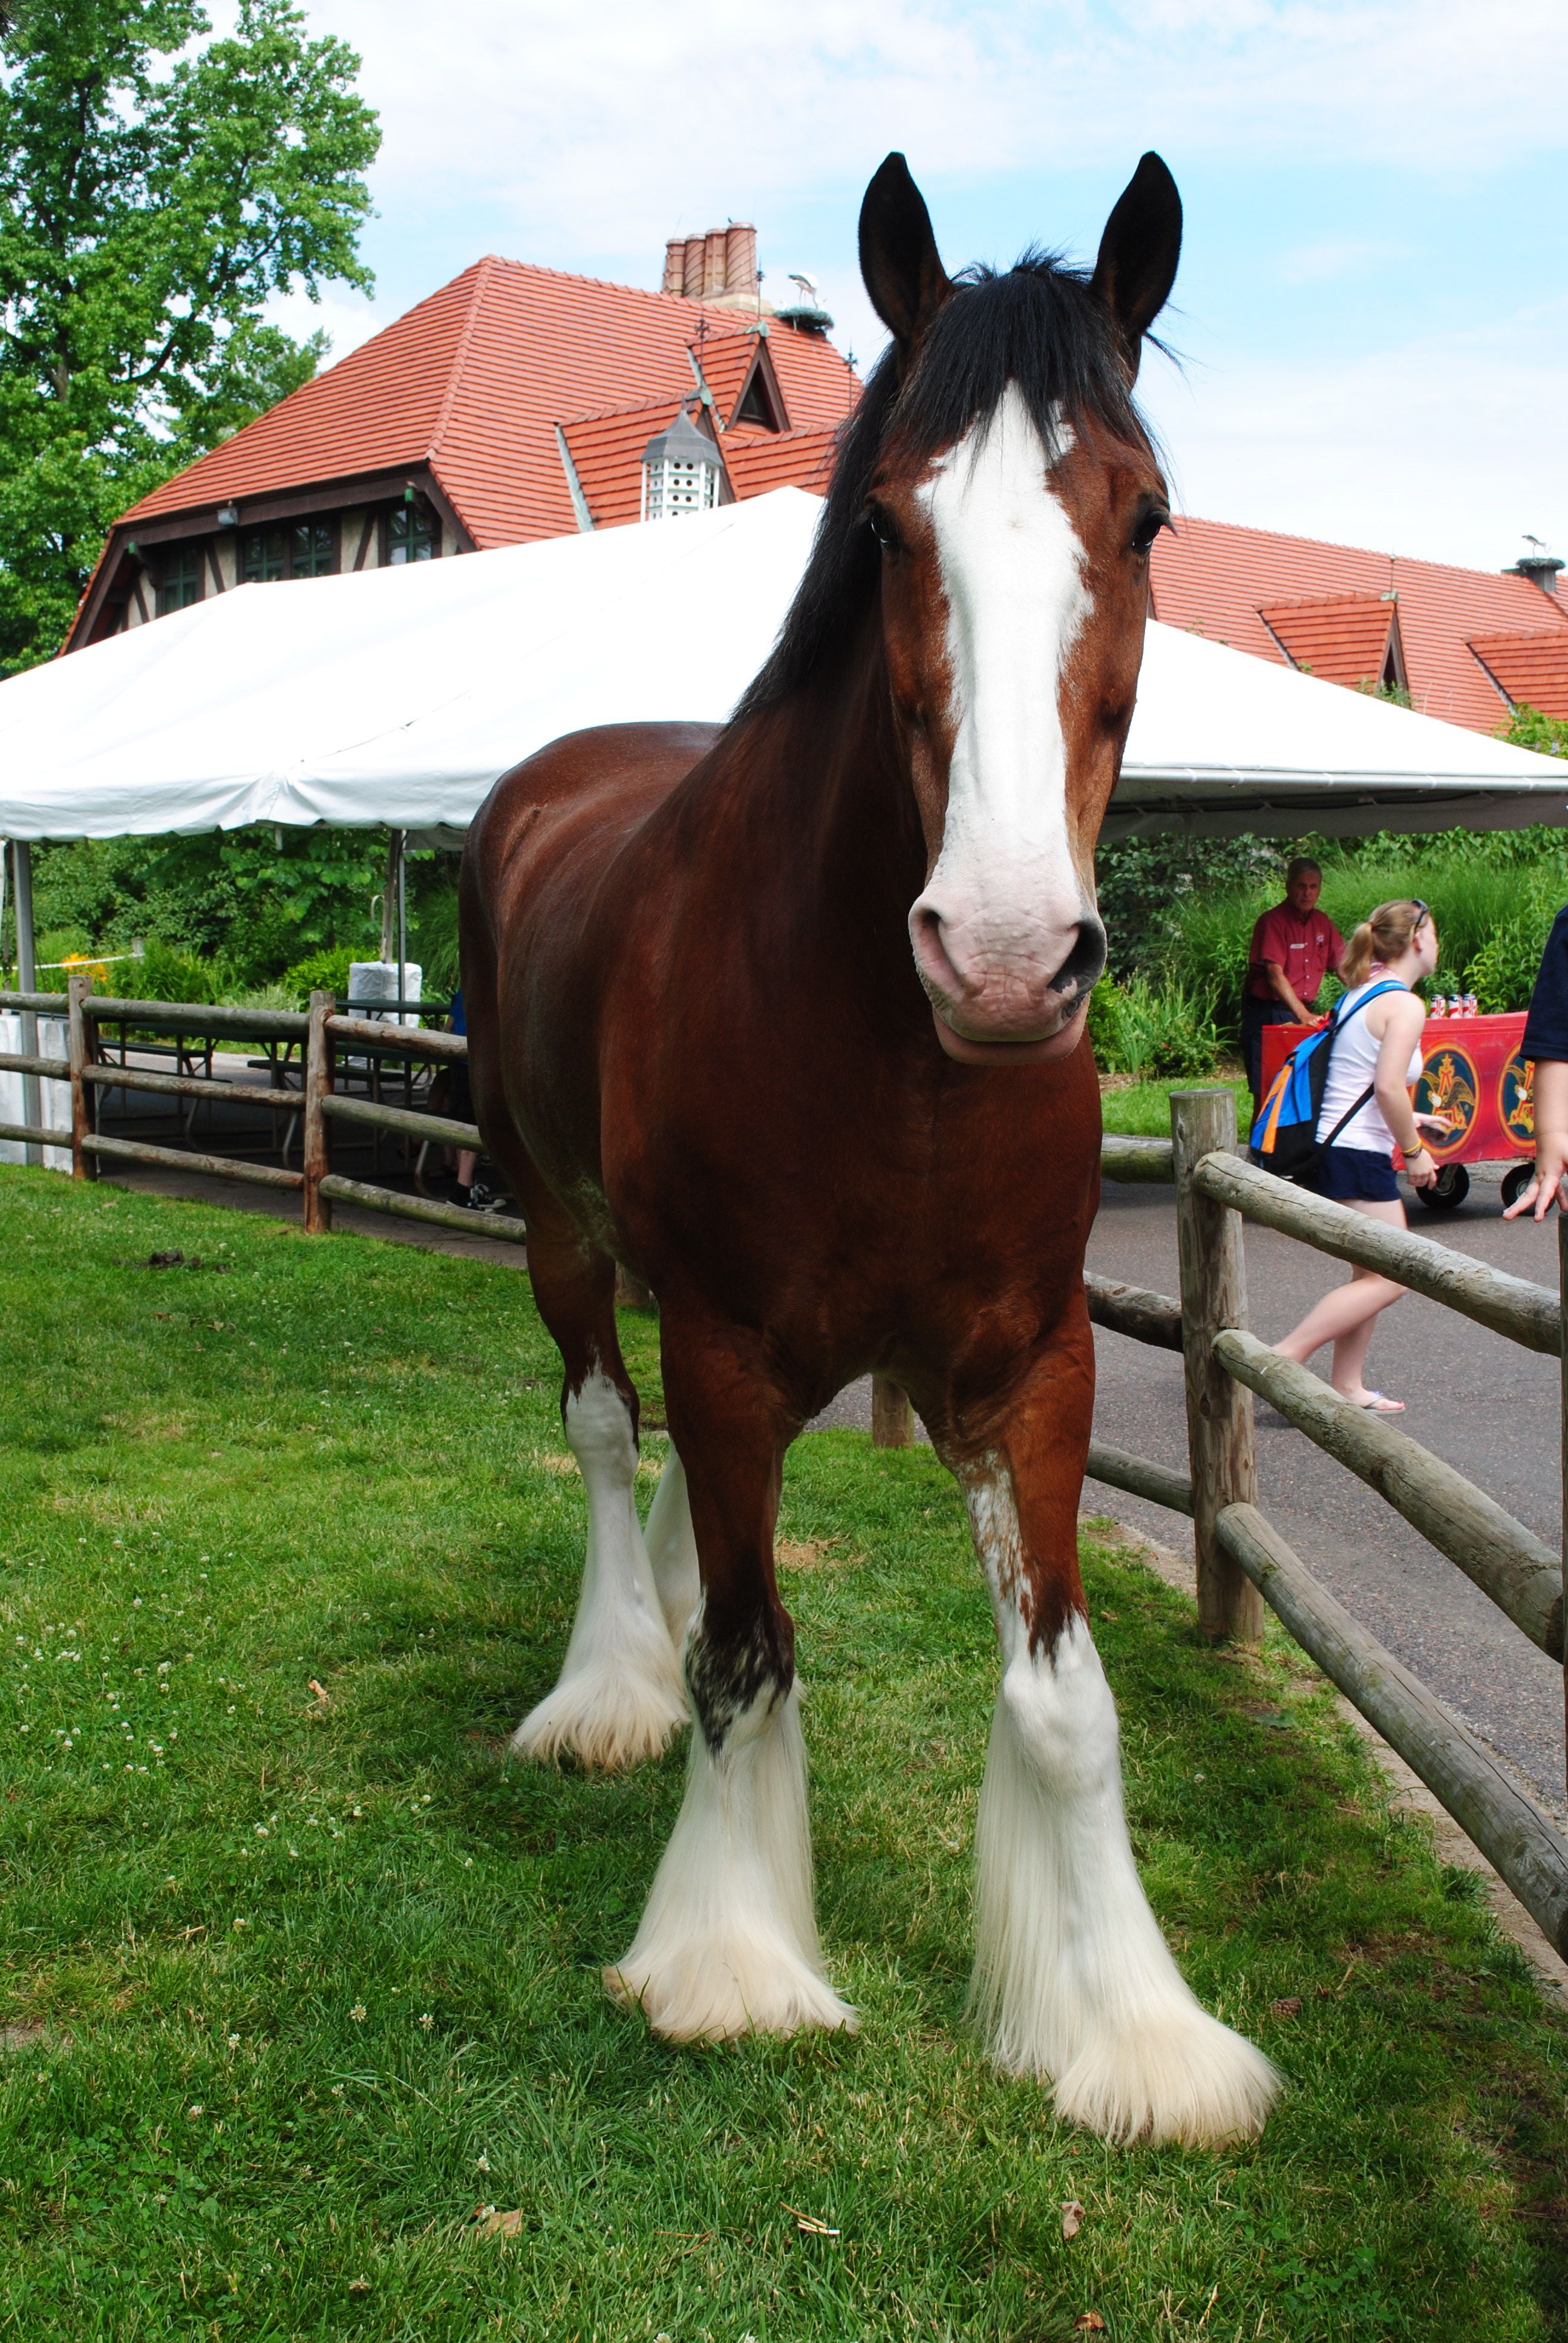 HUGE Clydesdales at Grants Farm! Beautiful horses! Some of which are ...